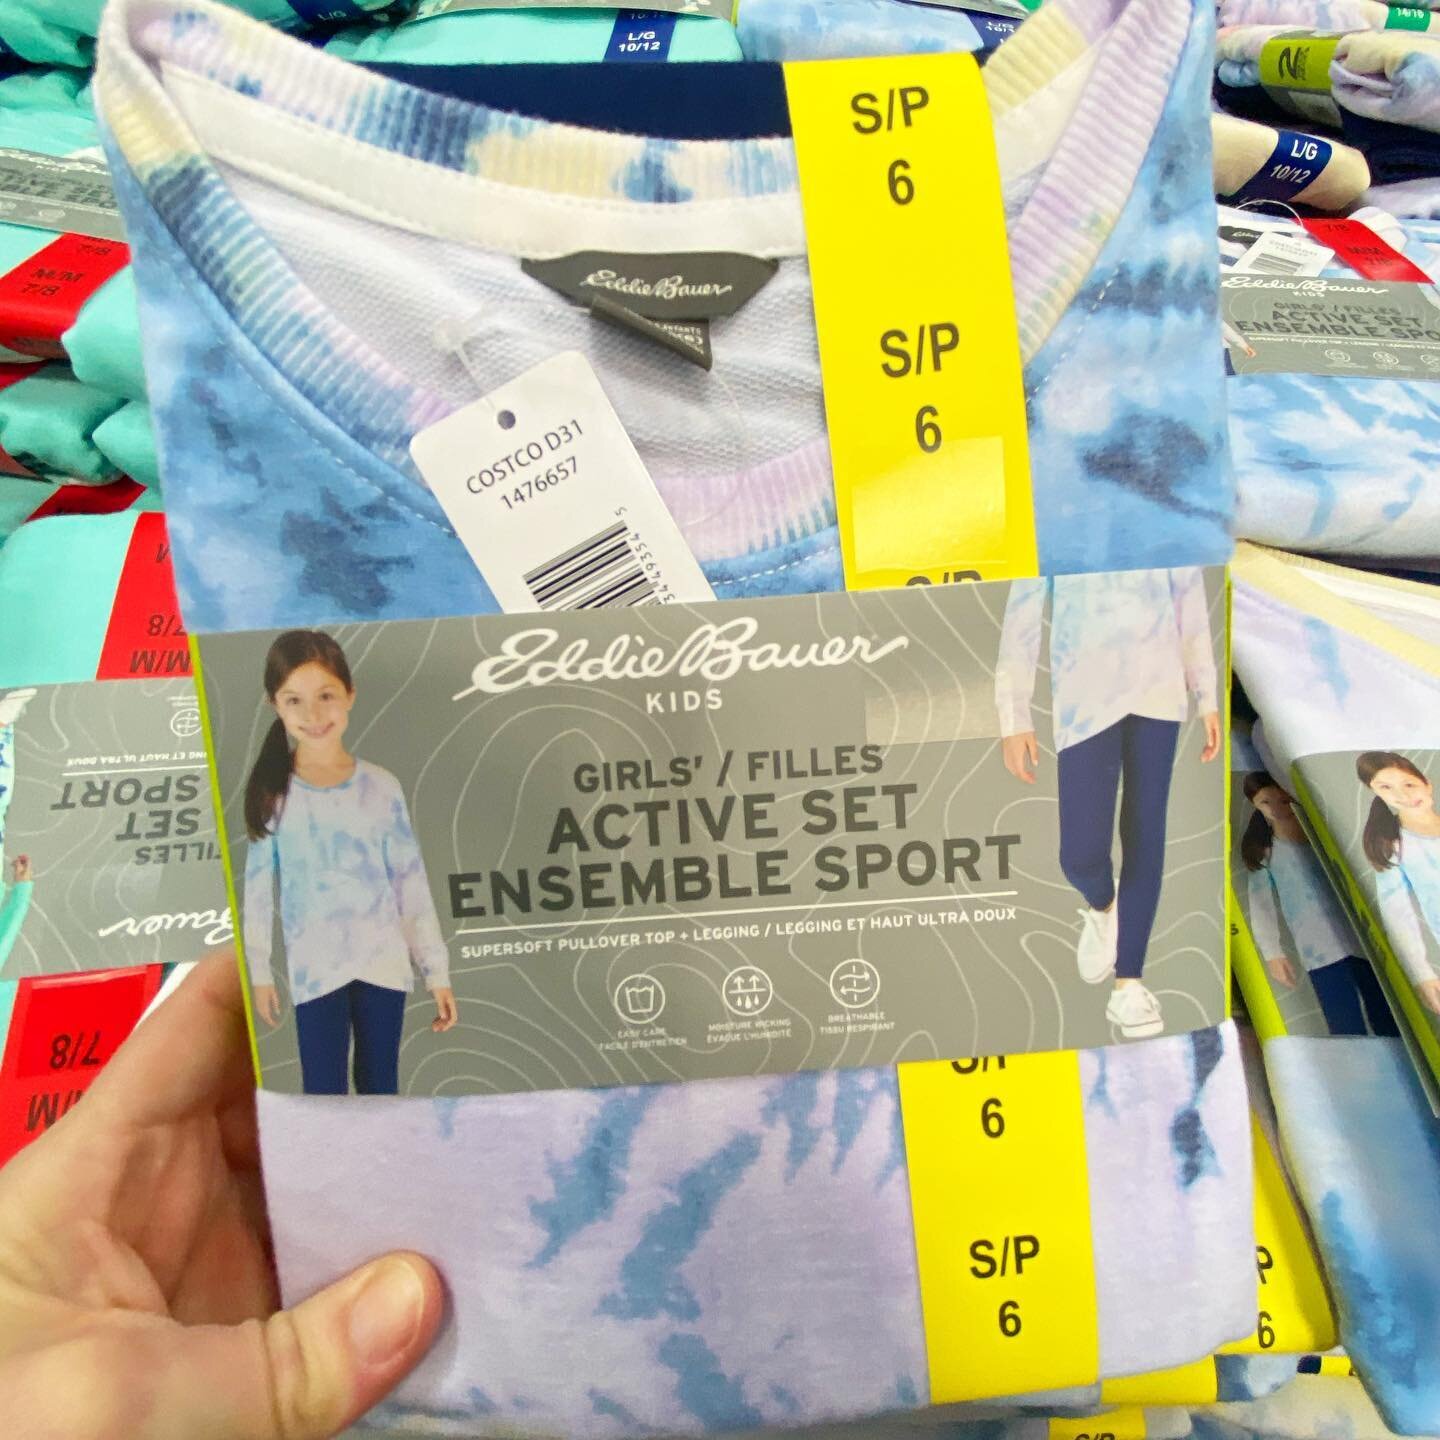 Girls 2PC Active Set from @eddiebauer - each set comes with pants and soft long sleeve shirt. There were 4 different patterns to choose! Sizes S - XL. Price $18.99 📍NW Vaughan 
#costco #costcofindscanada #costcofinds #costcohaul #costcobuys #costcod